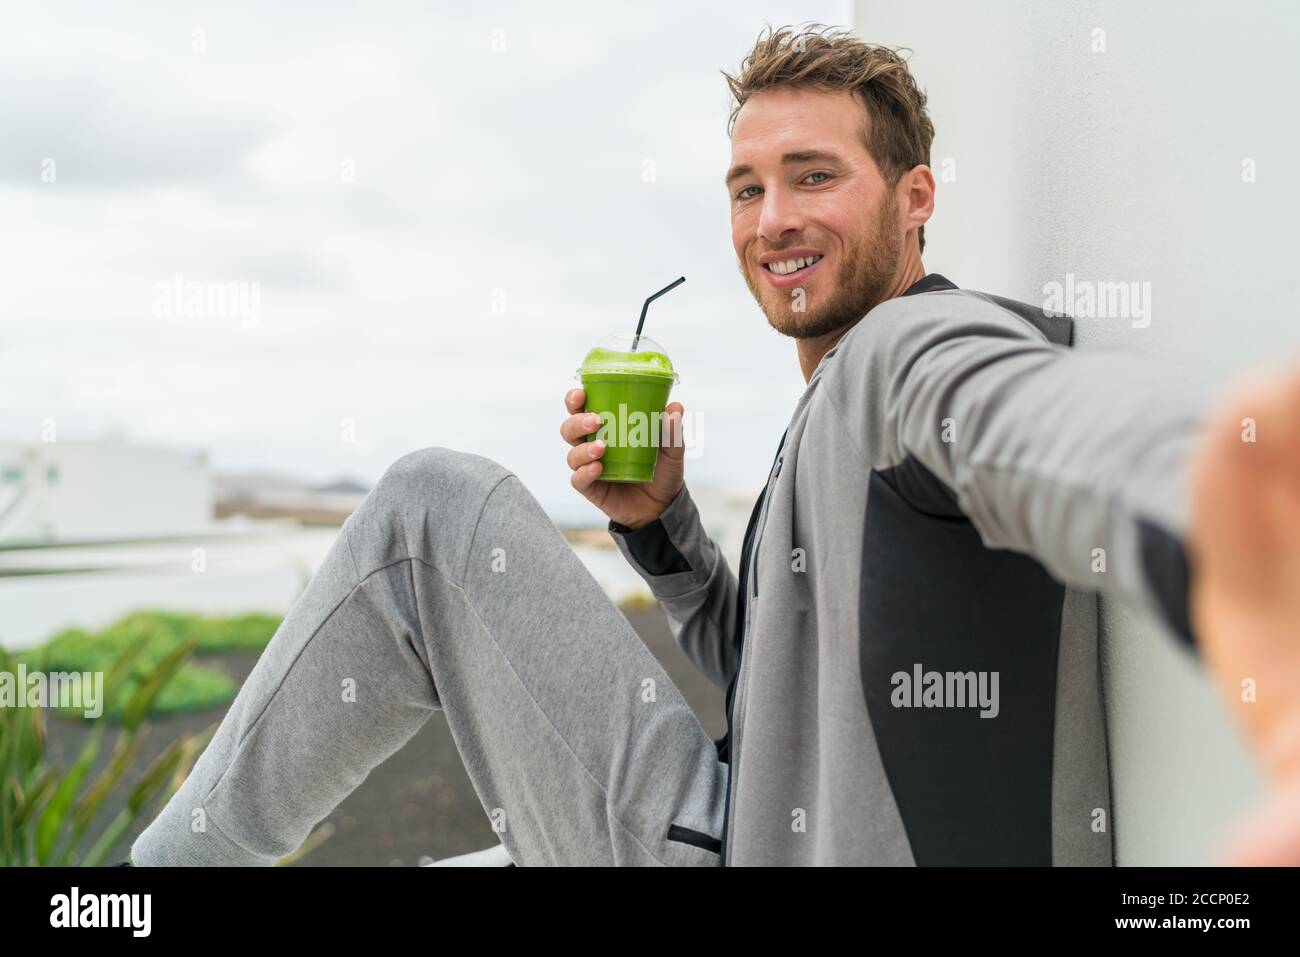 Healthy green smoothie selfie sport fitness man taking self portrait picture at gym drinking vegetable juice after workout in sweatpants and Stock Photo